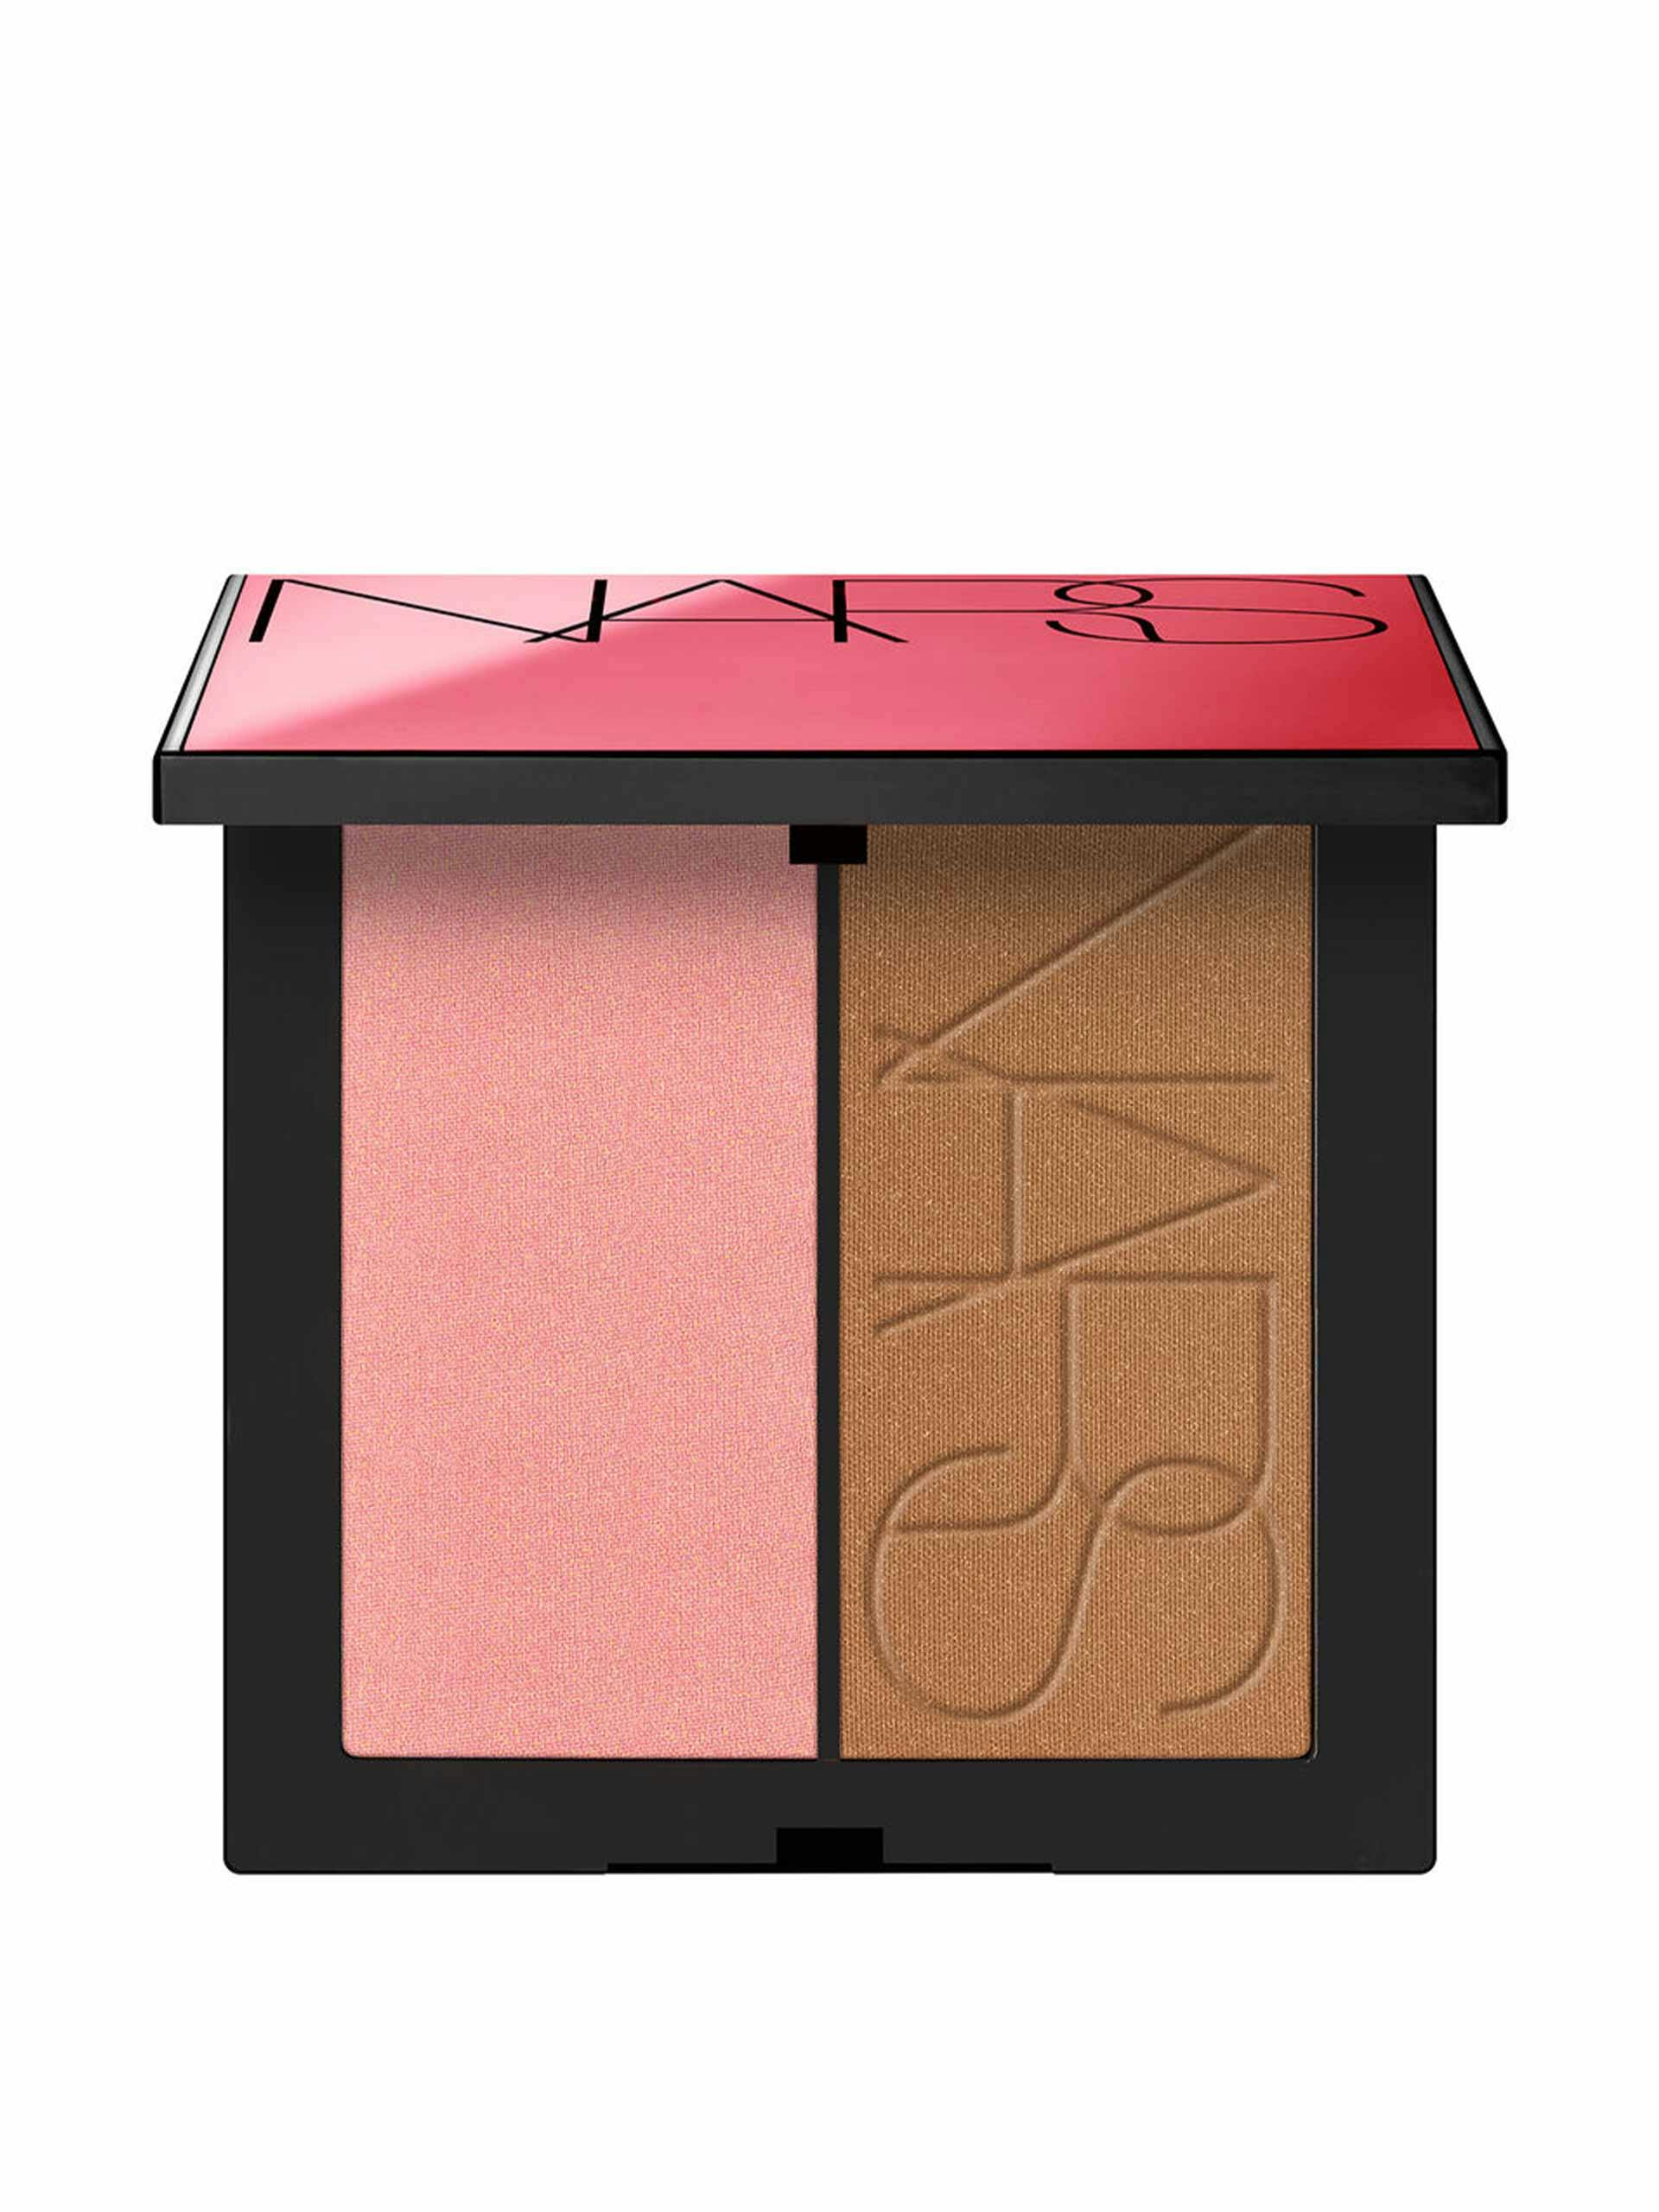 Summer unrated blush/bronzer duo